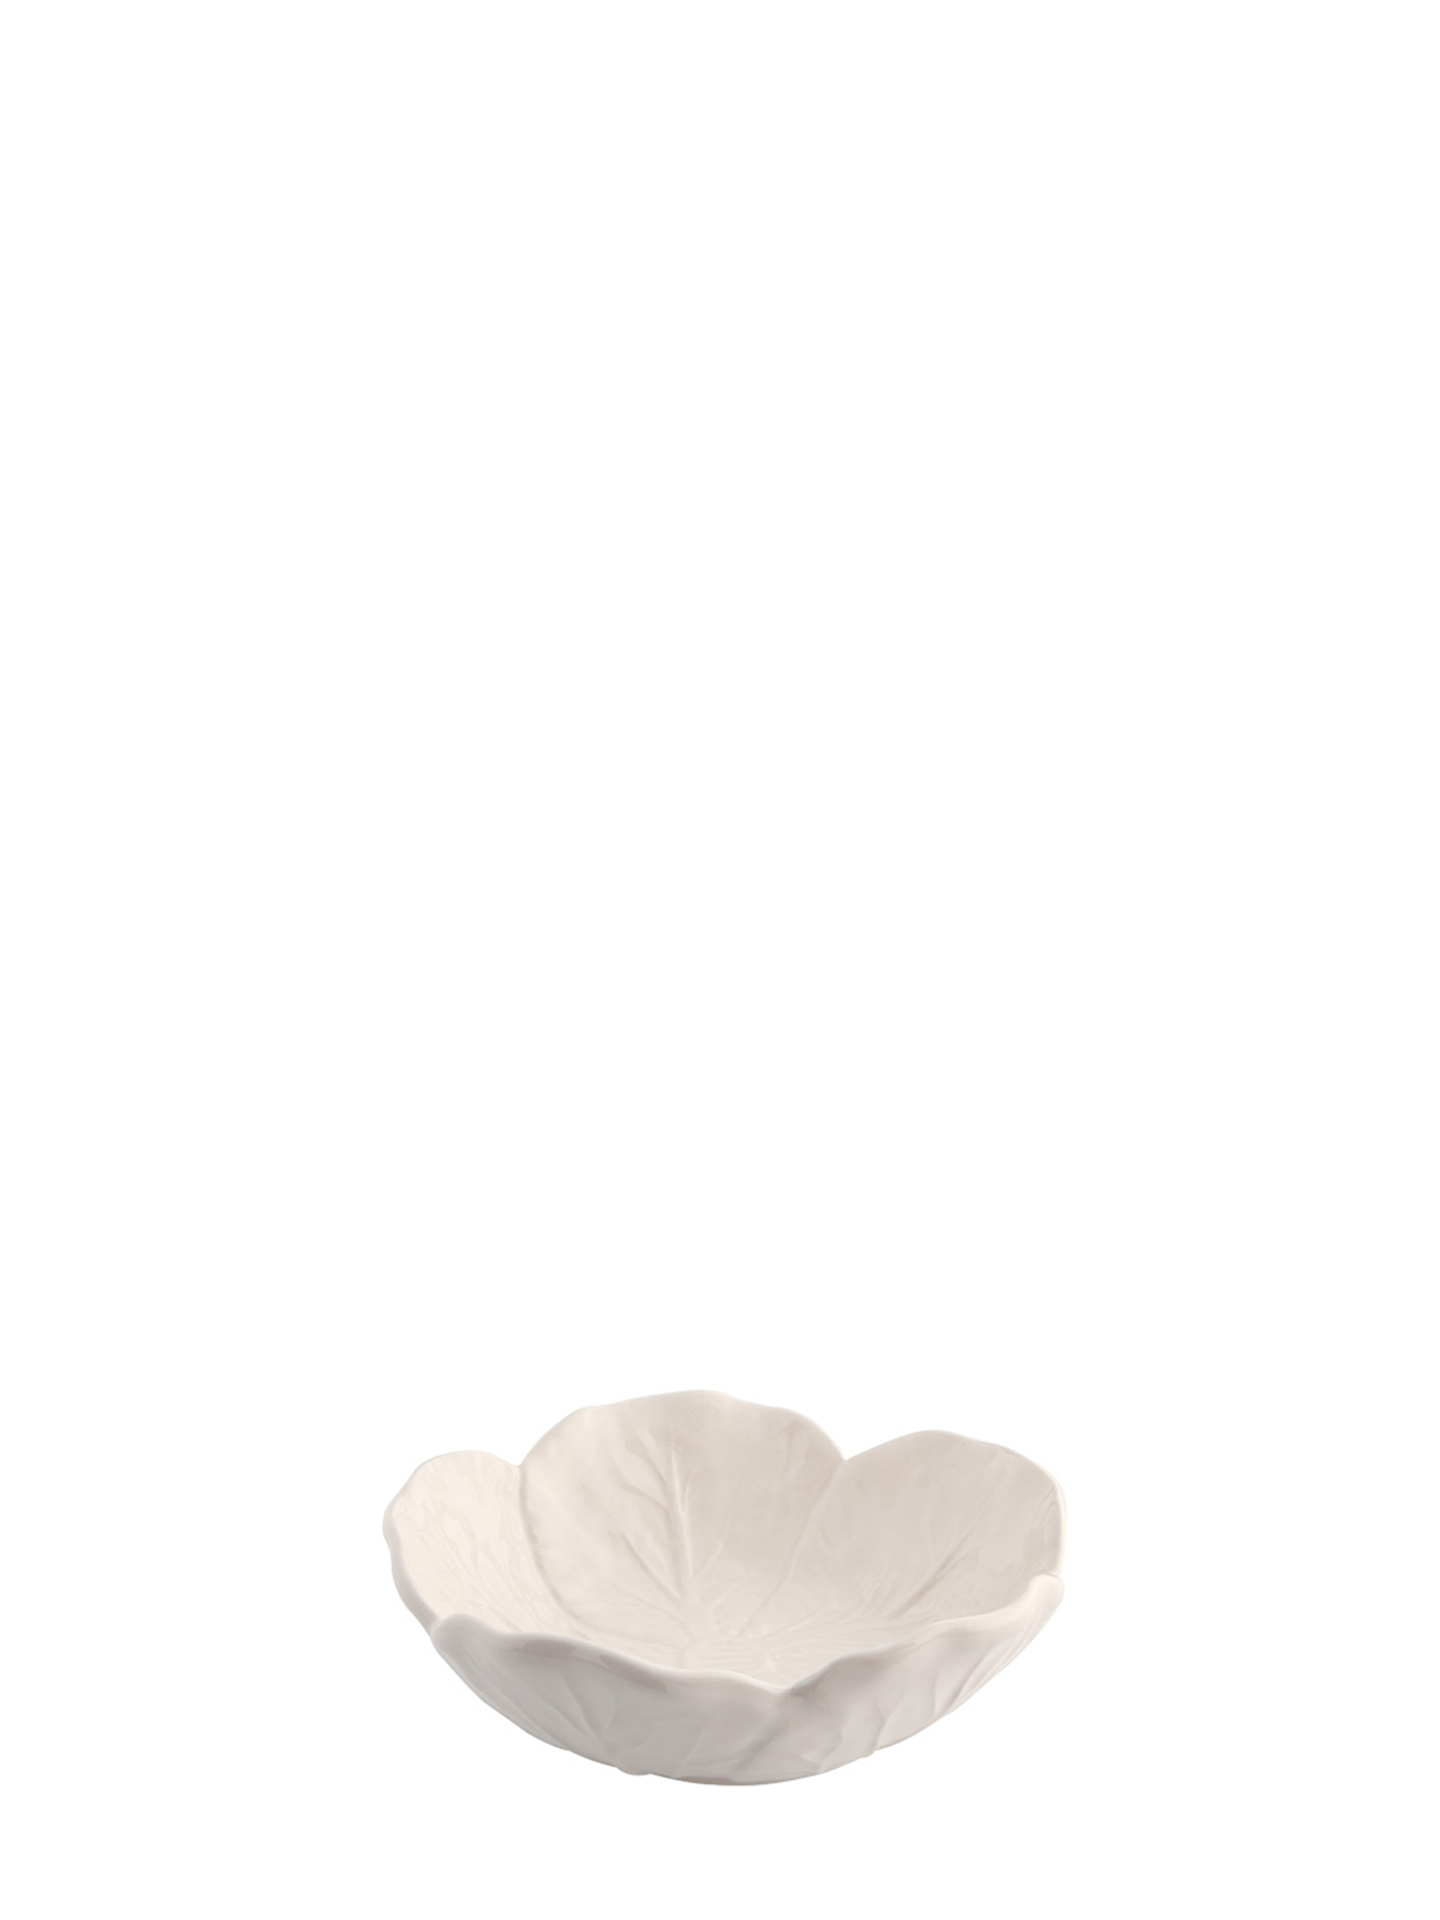 Cabbage Bowl small (12cm), Ivory